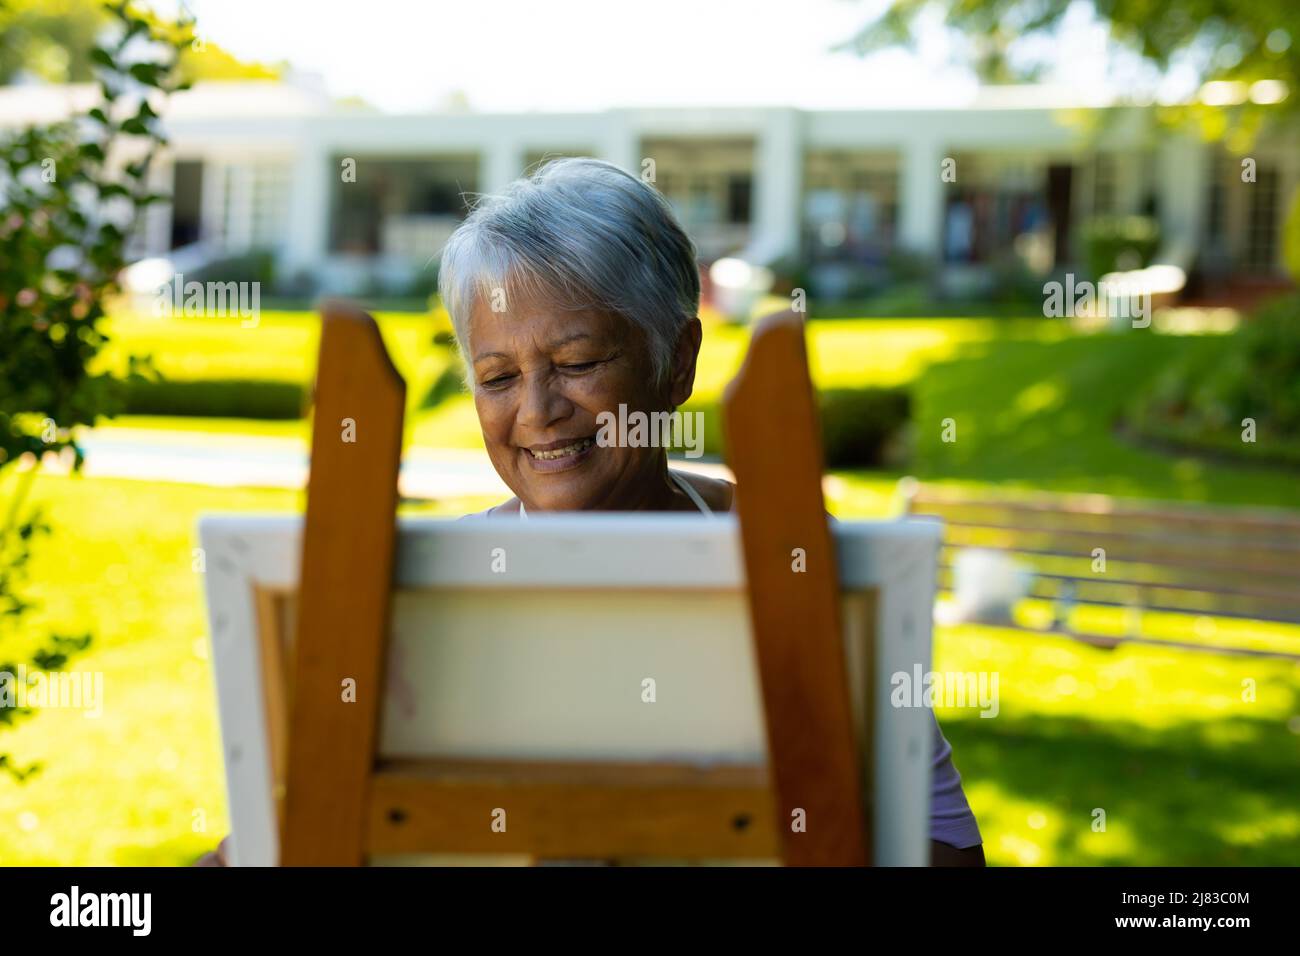 Smiling biracial senior woman with short gray hair painting on canvas against house in yard Stock Photo